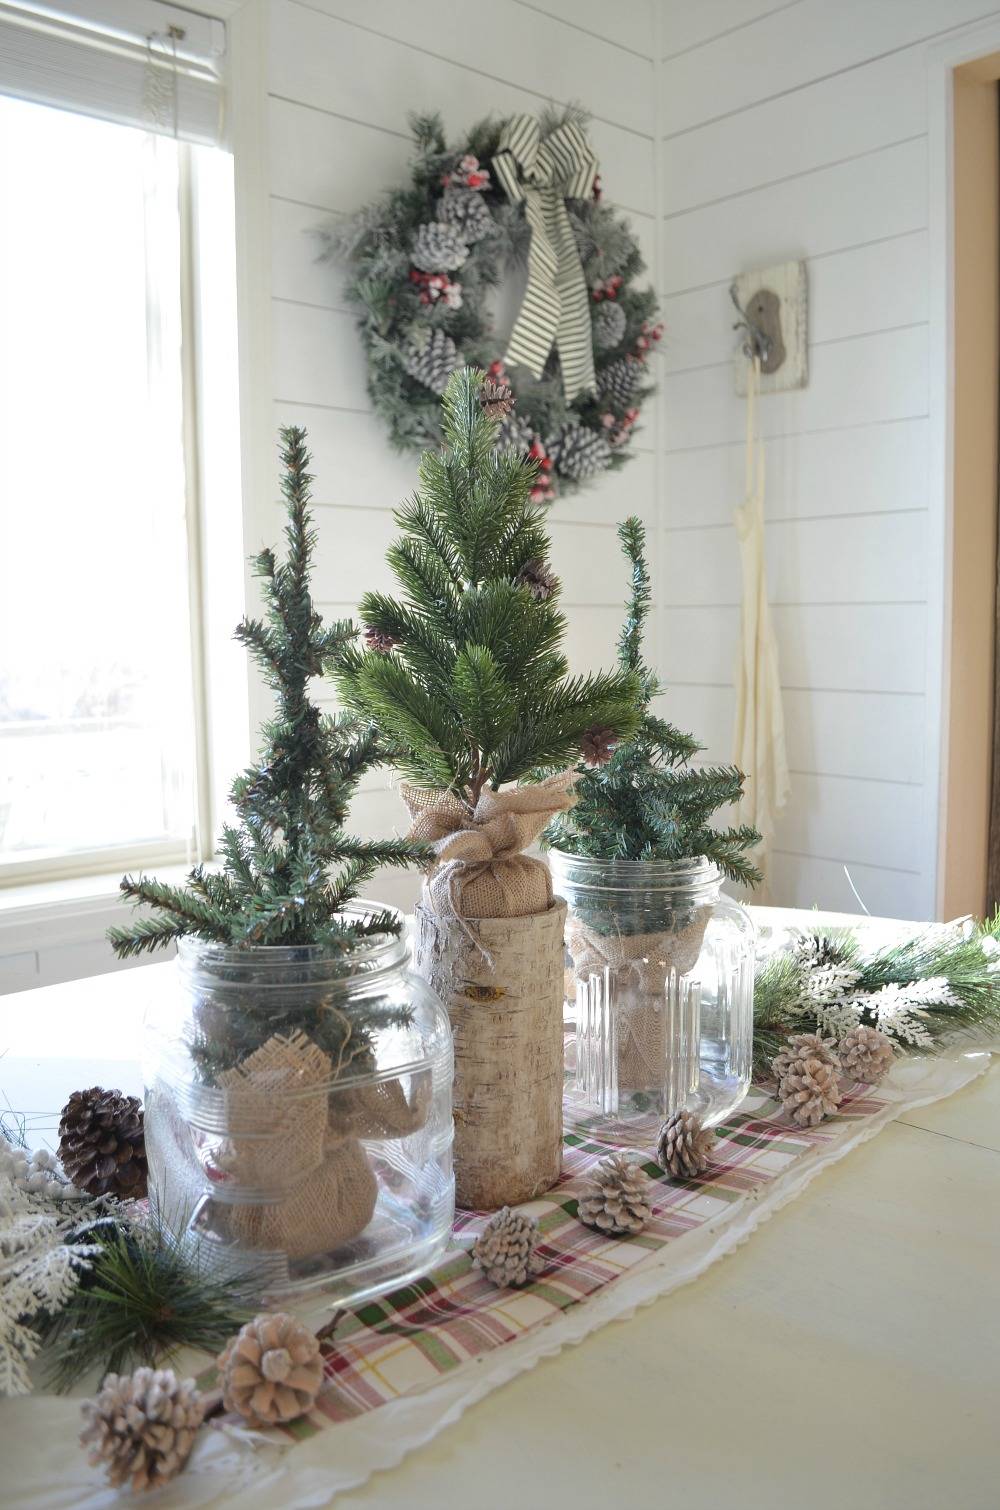 Easy table centerpiece inspired by nature (from Sarah Joy Blog)